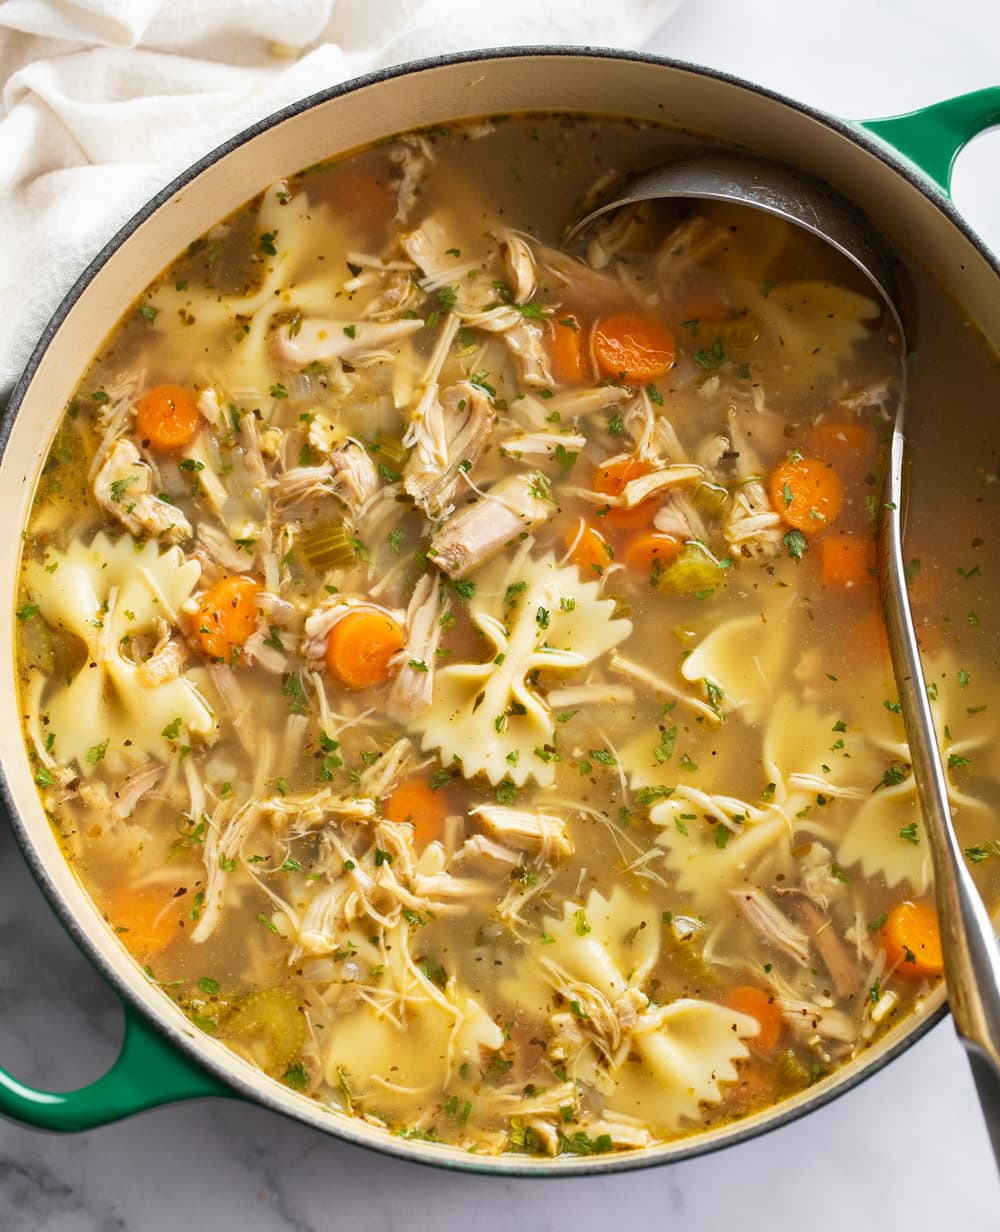 A soup pot filled with Turkey Soup with vegetables, bowtie pasta, and a ladle on the side.